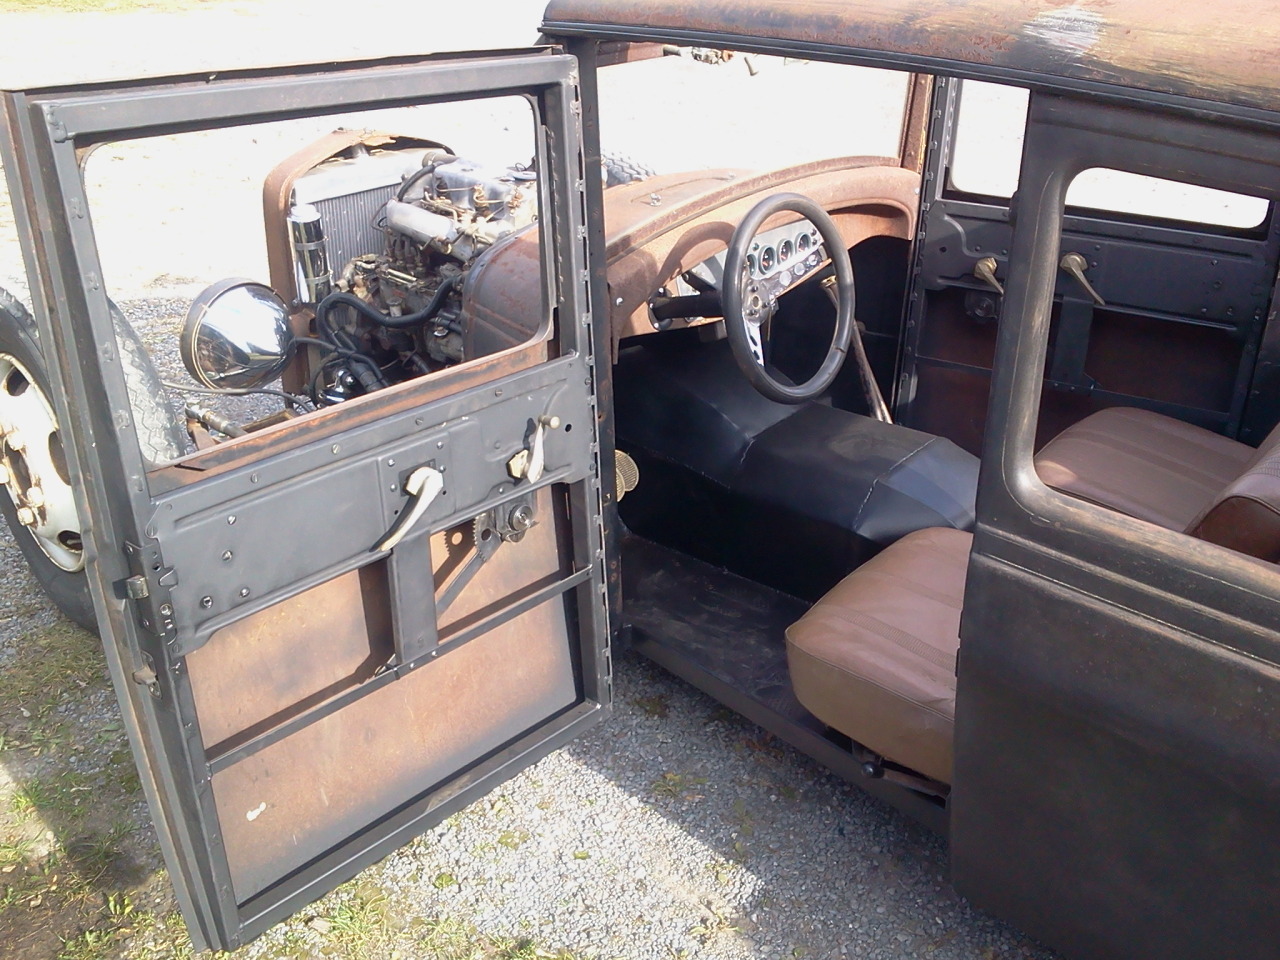 theonomics: I built this one from a 1931 huppmobile, used a 3.9 nissan ud diesel